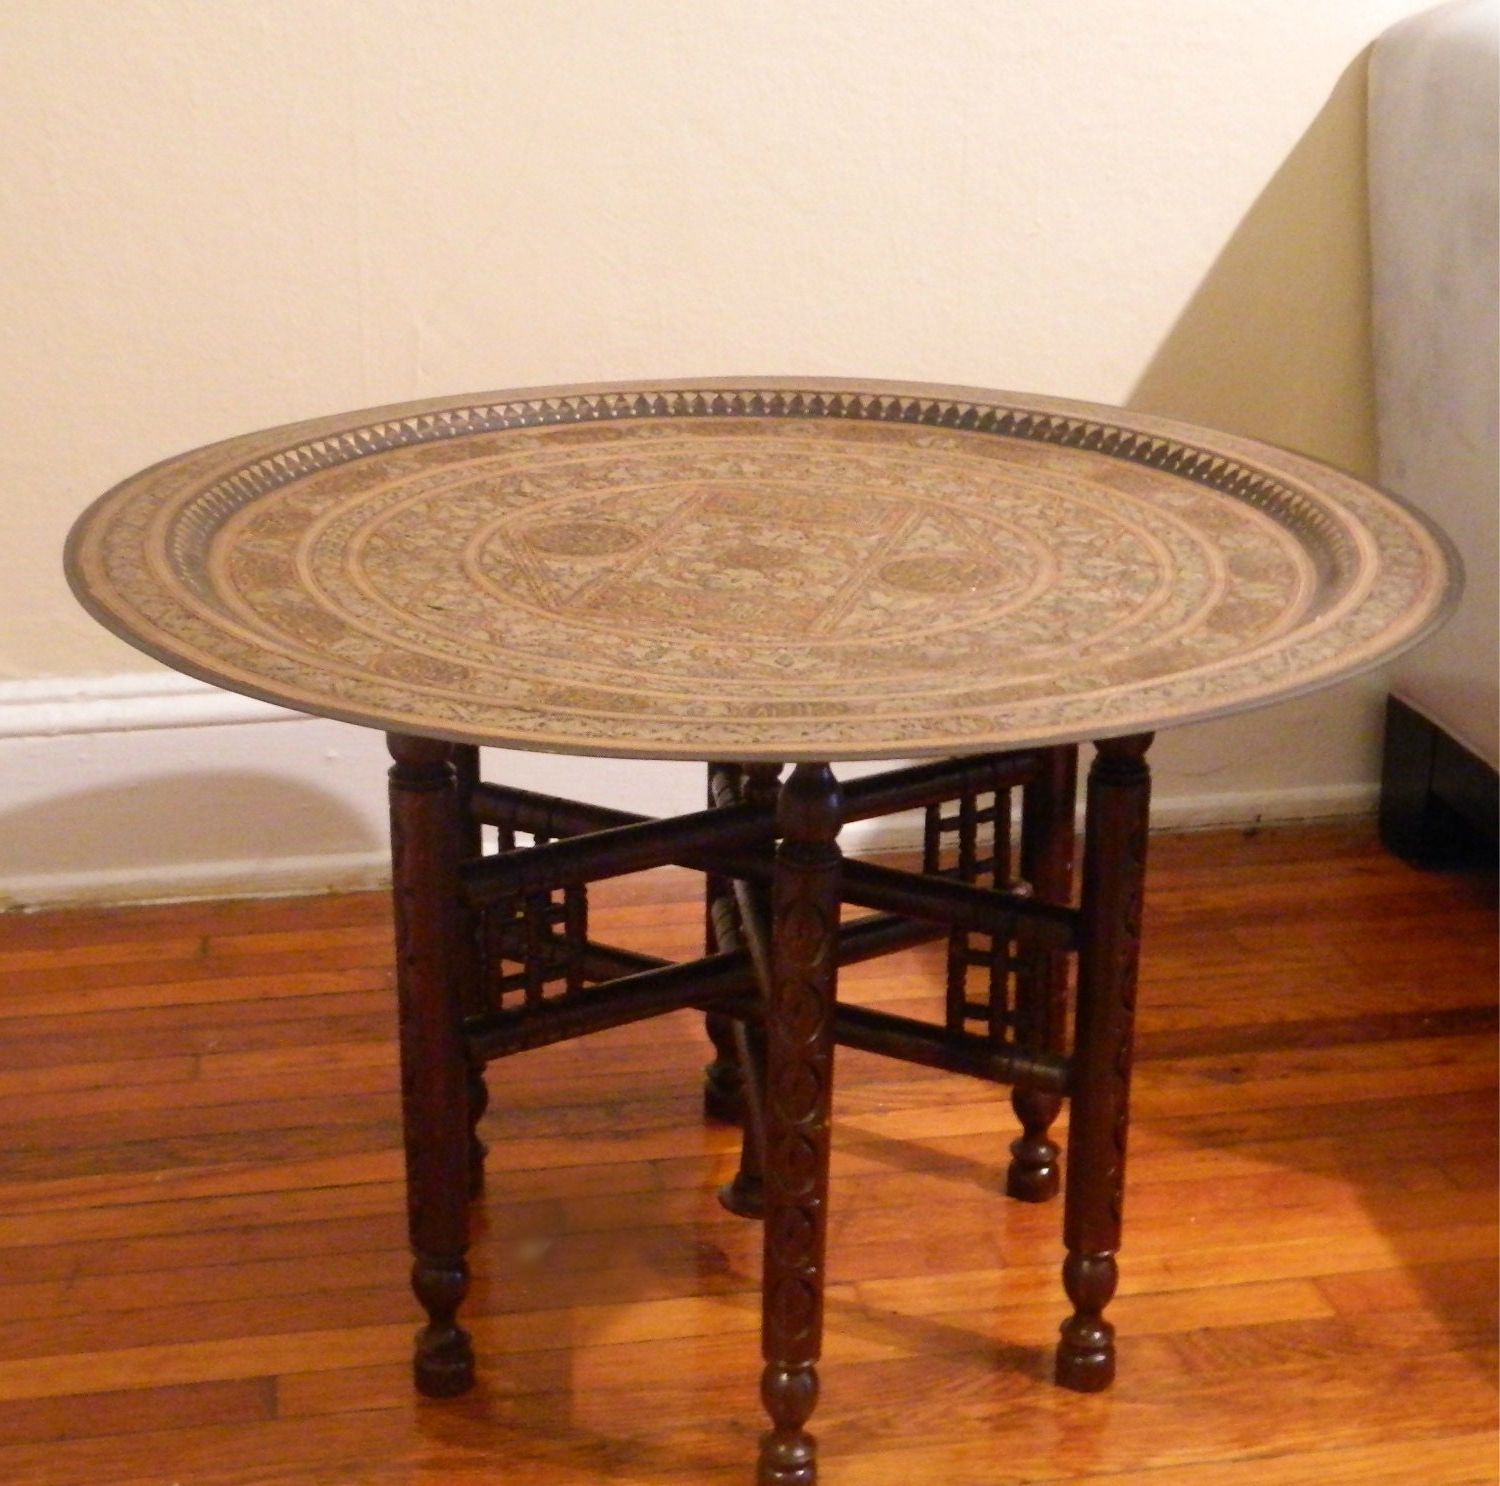 Popular Antique Brass Aluminum Round Coffee Tables With Sale: Round Moroccan Hammered Brass Tray Table (View 4 of 20)